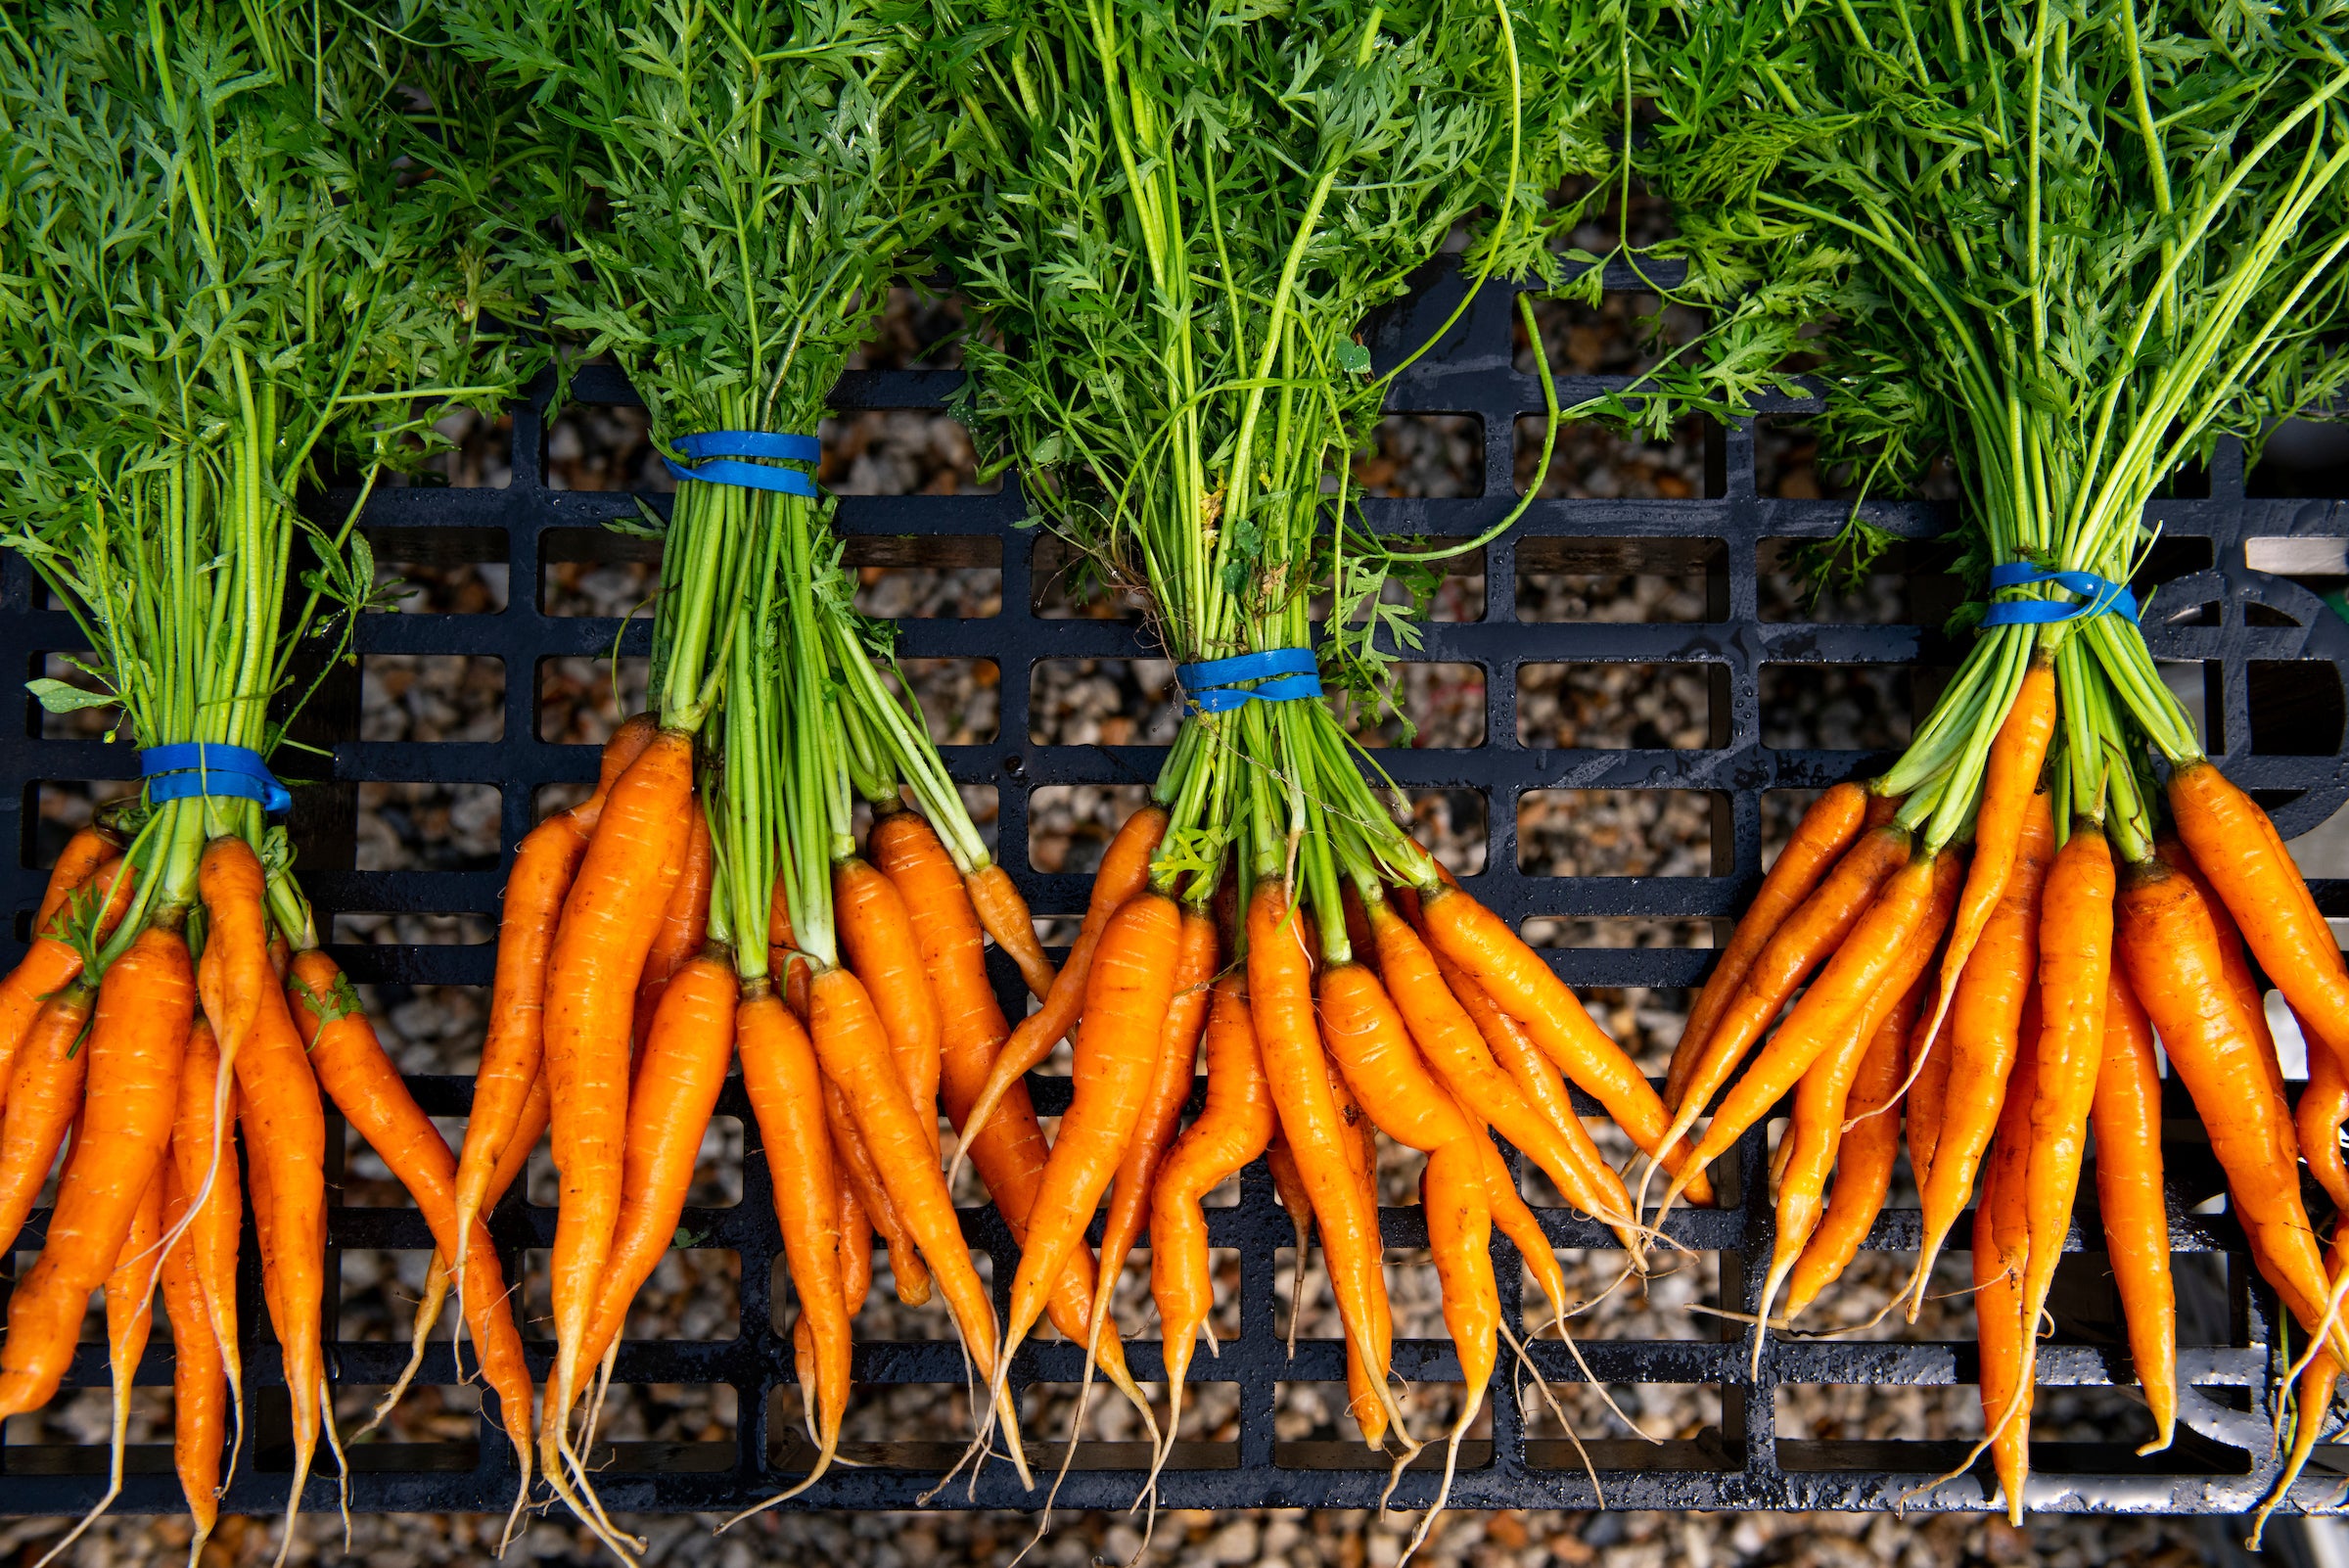 Fresh carrots collected on-site at New Entry's new farm location